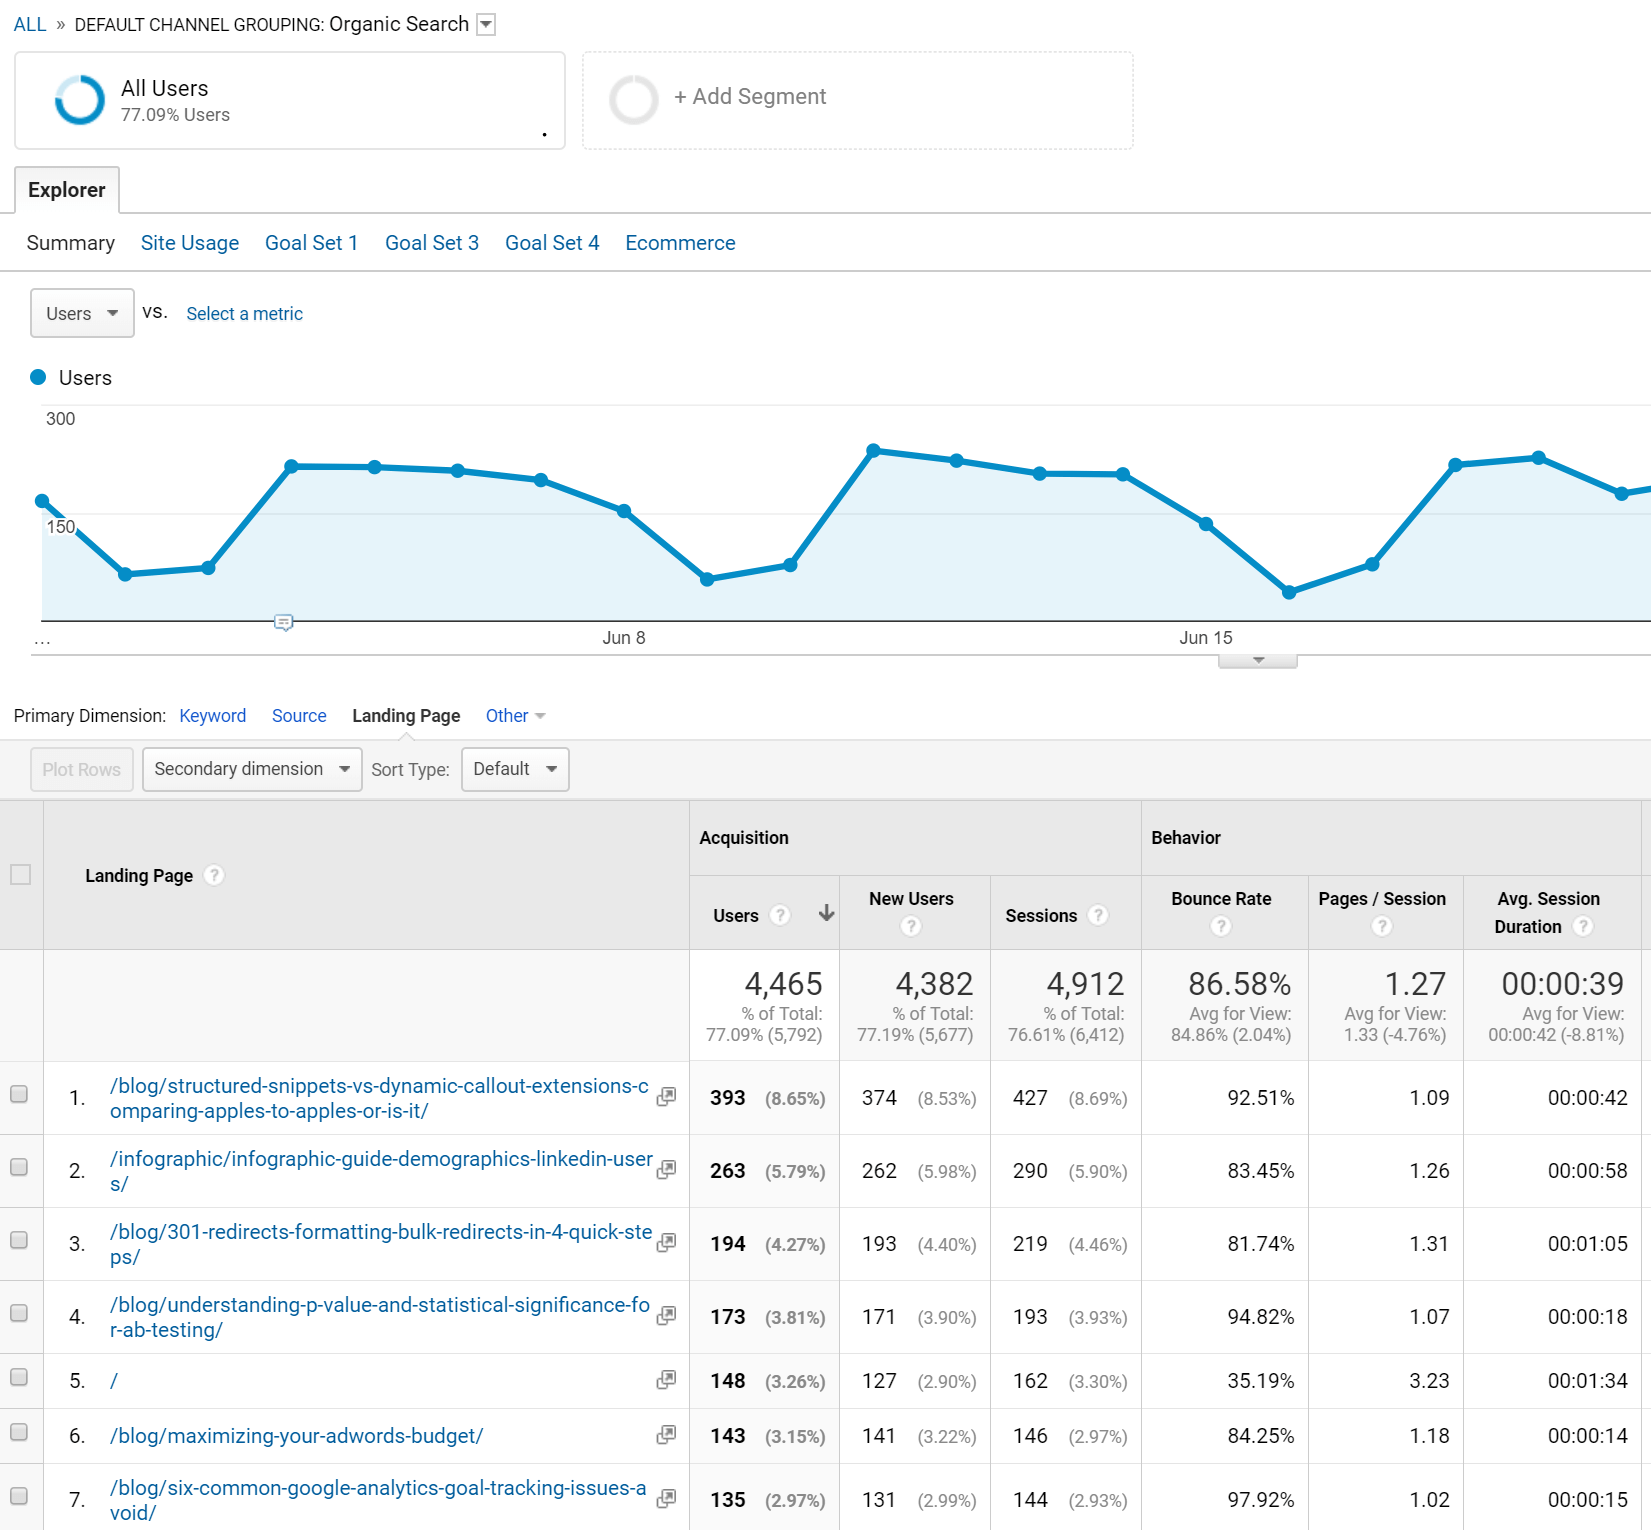 Be careful what content you cut from your site